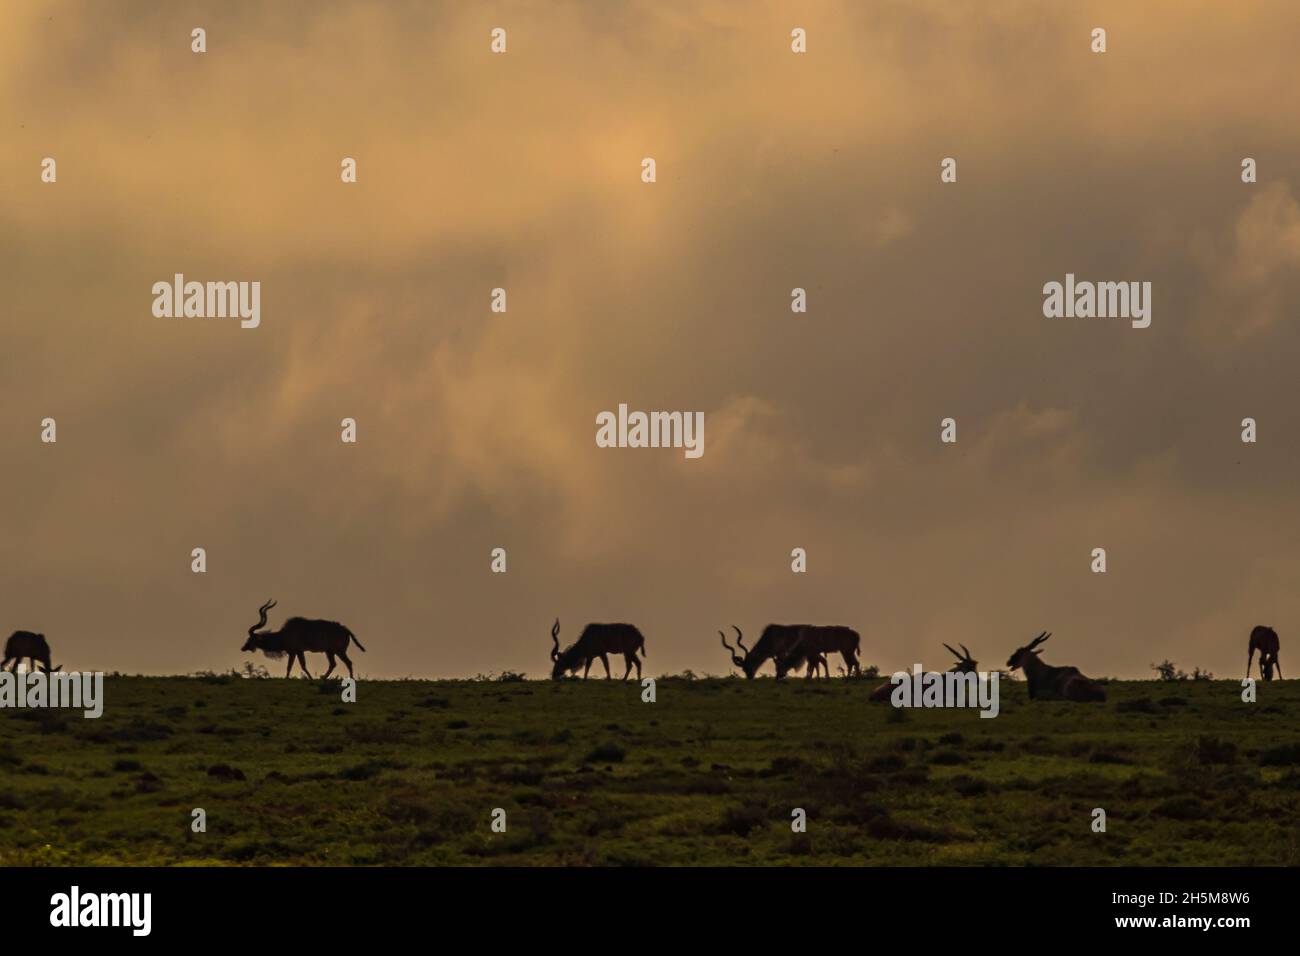 Silhouette of Greater kudus antelope on grassy ridge against misty, cloudy sky during sunrise at Addo Elephant National Park, South Africa. Stock Photo